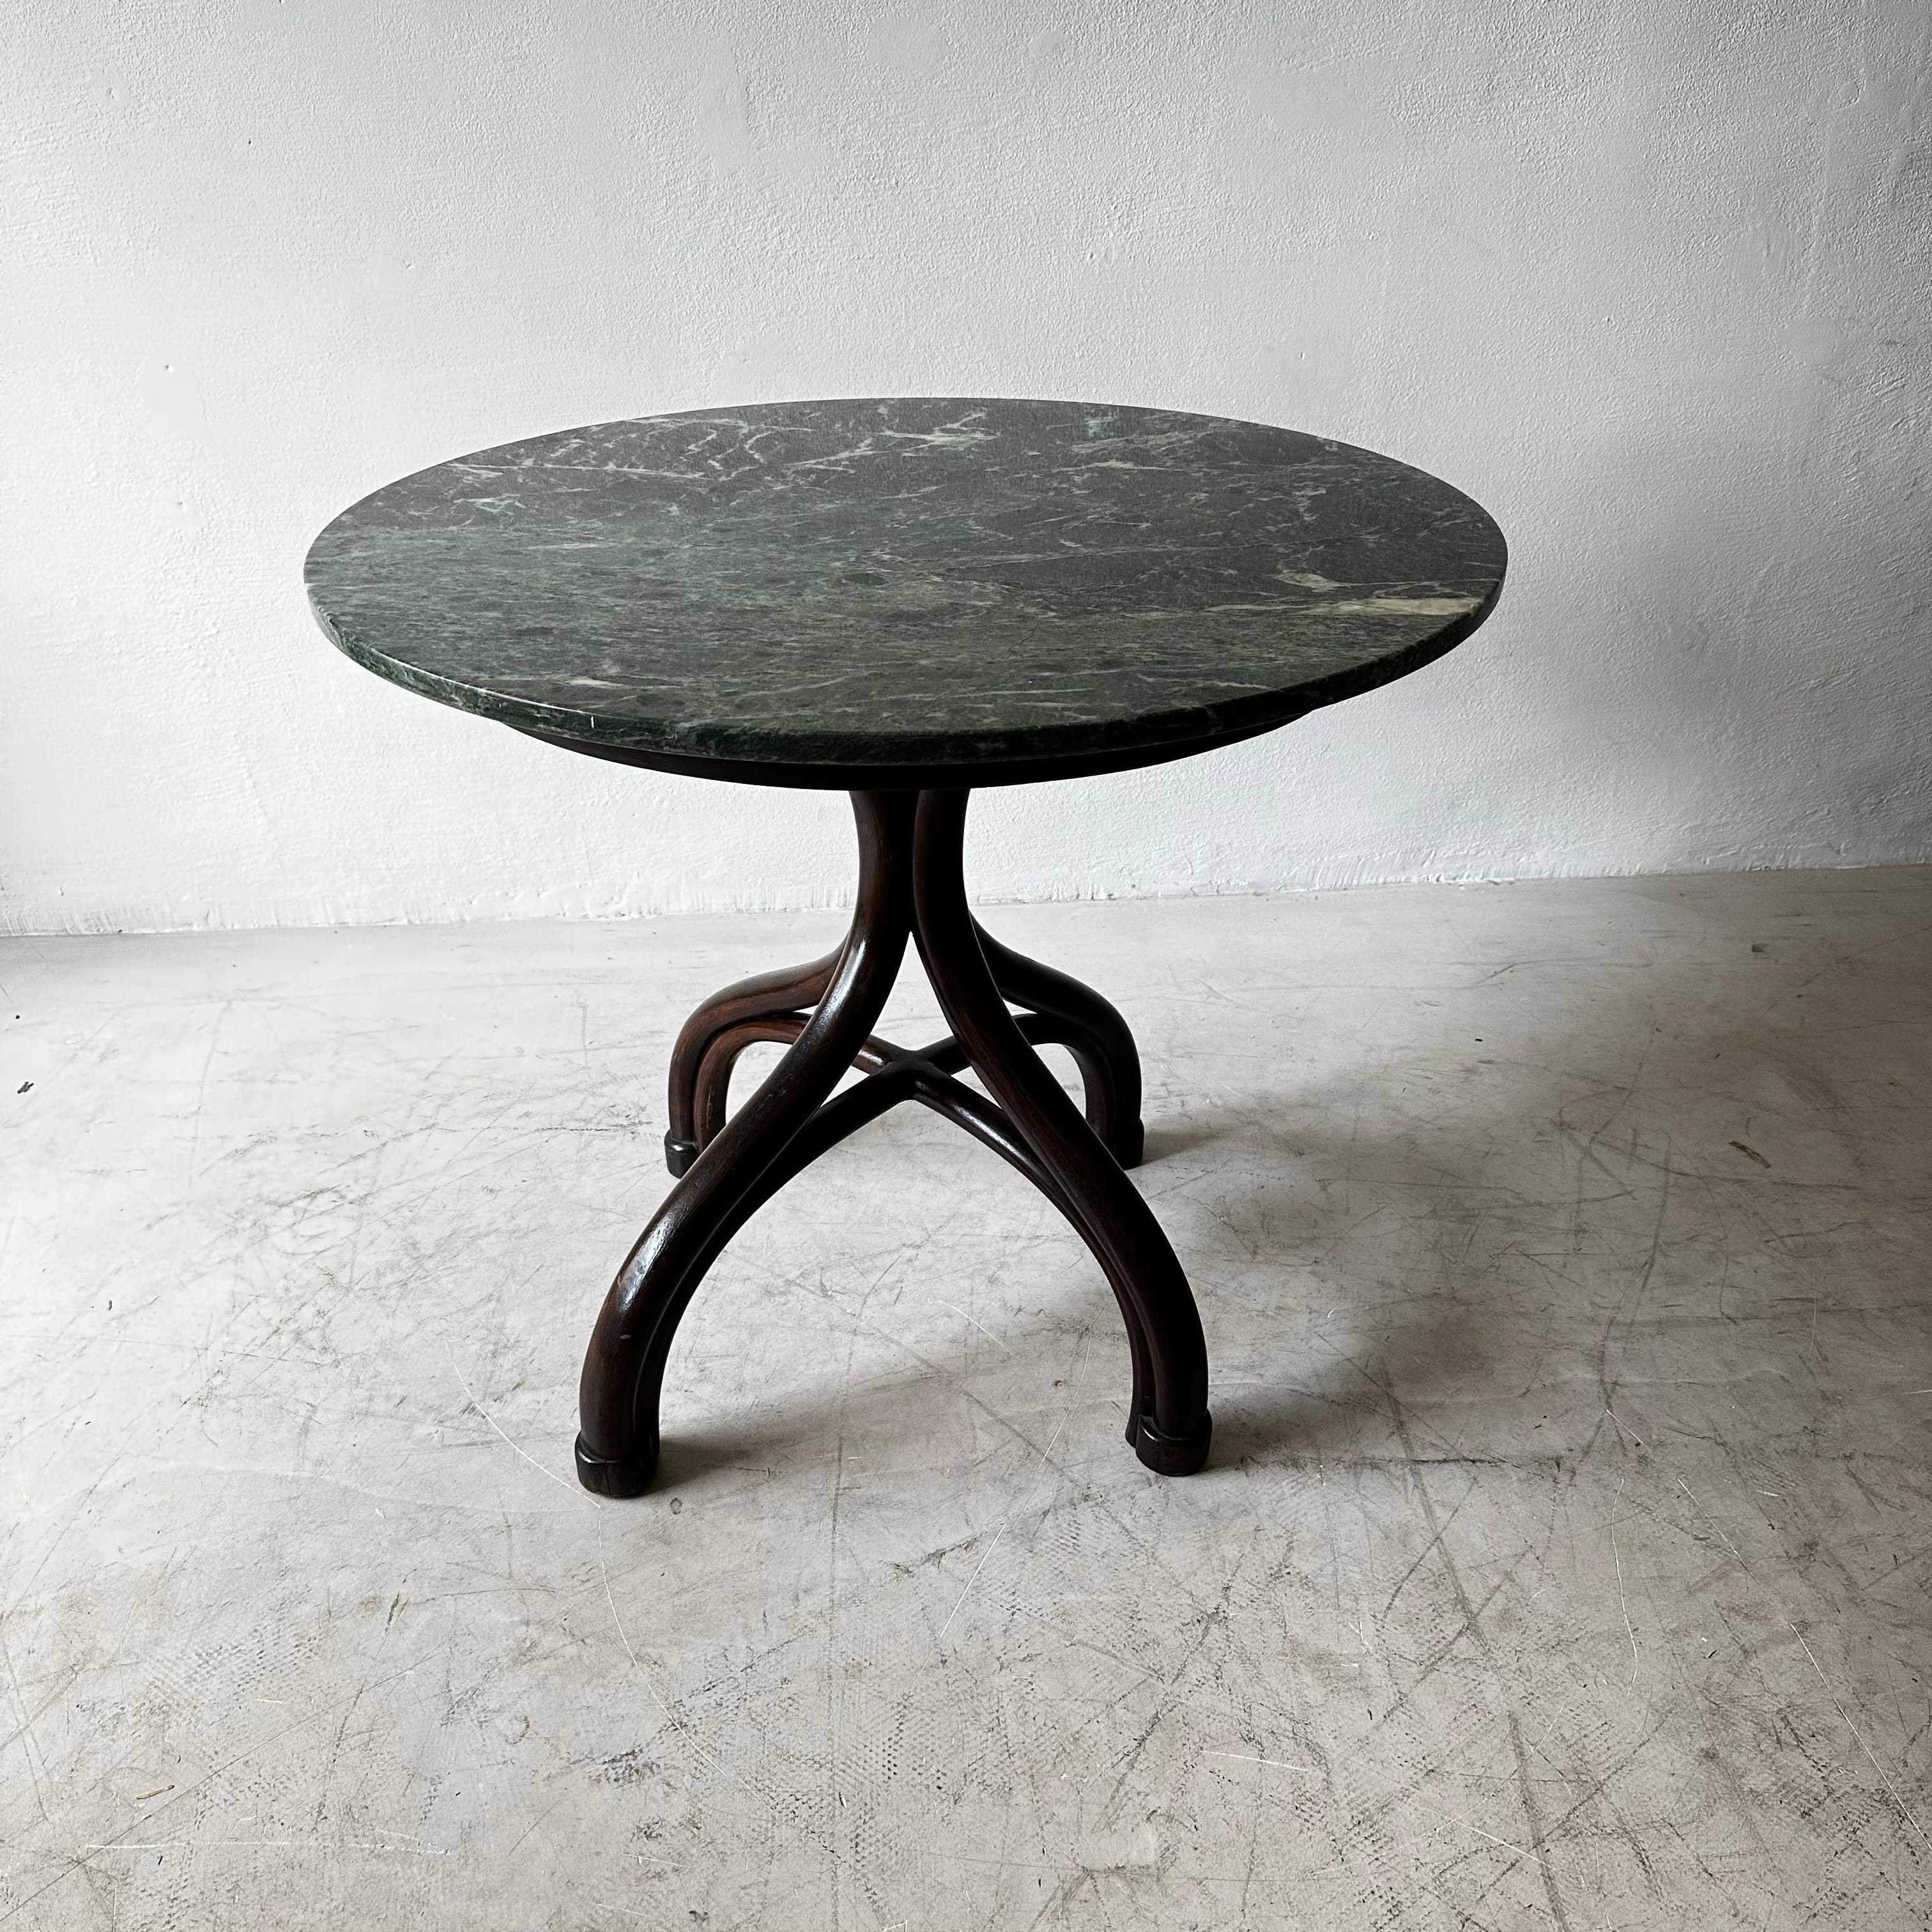 Adolf Loos Cafe Museum Center Hall Table with Green Marble Top, Austria 1910.